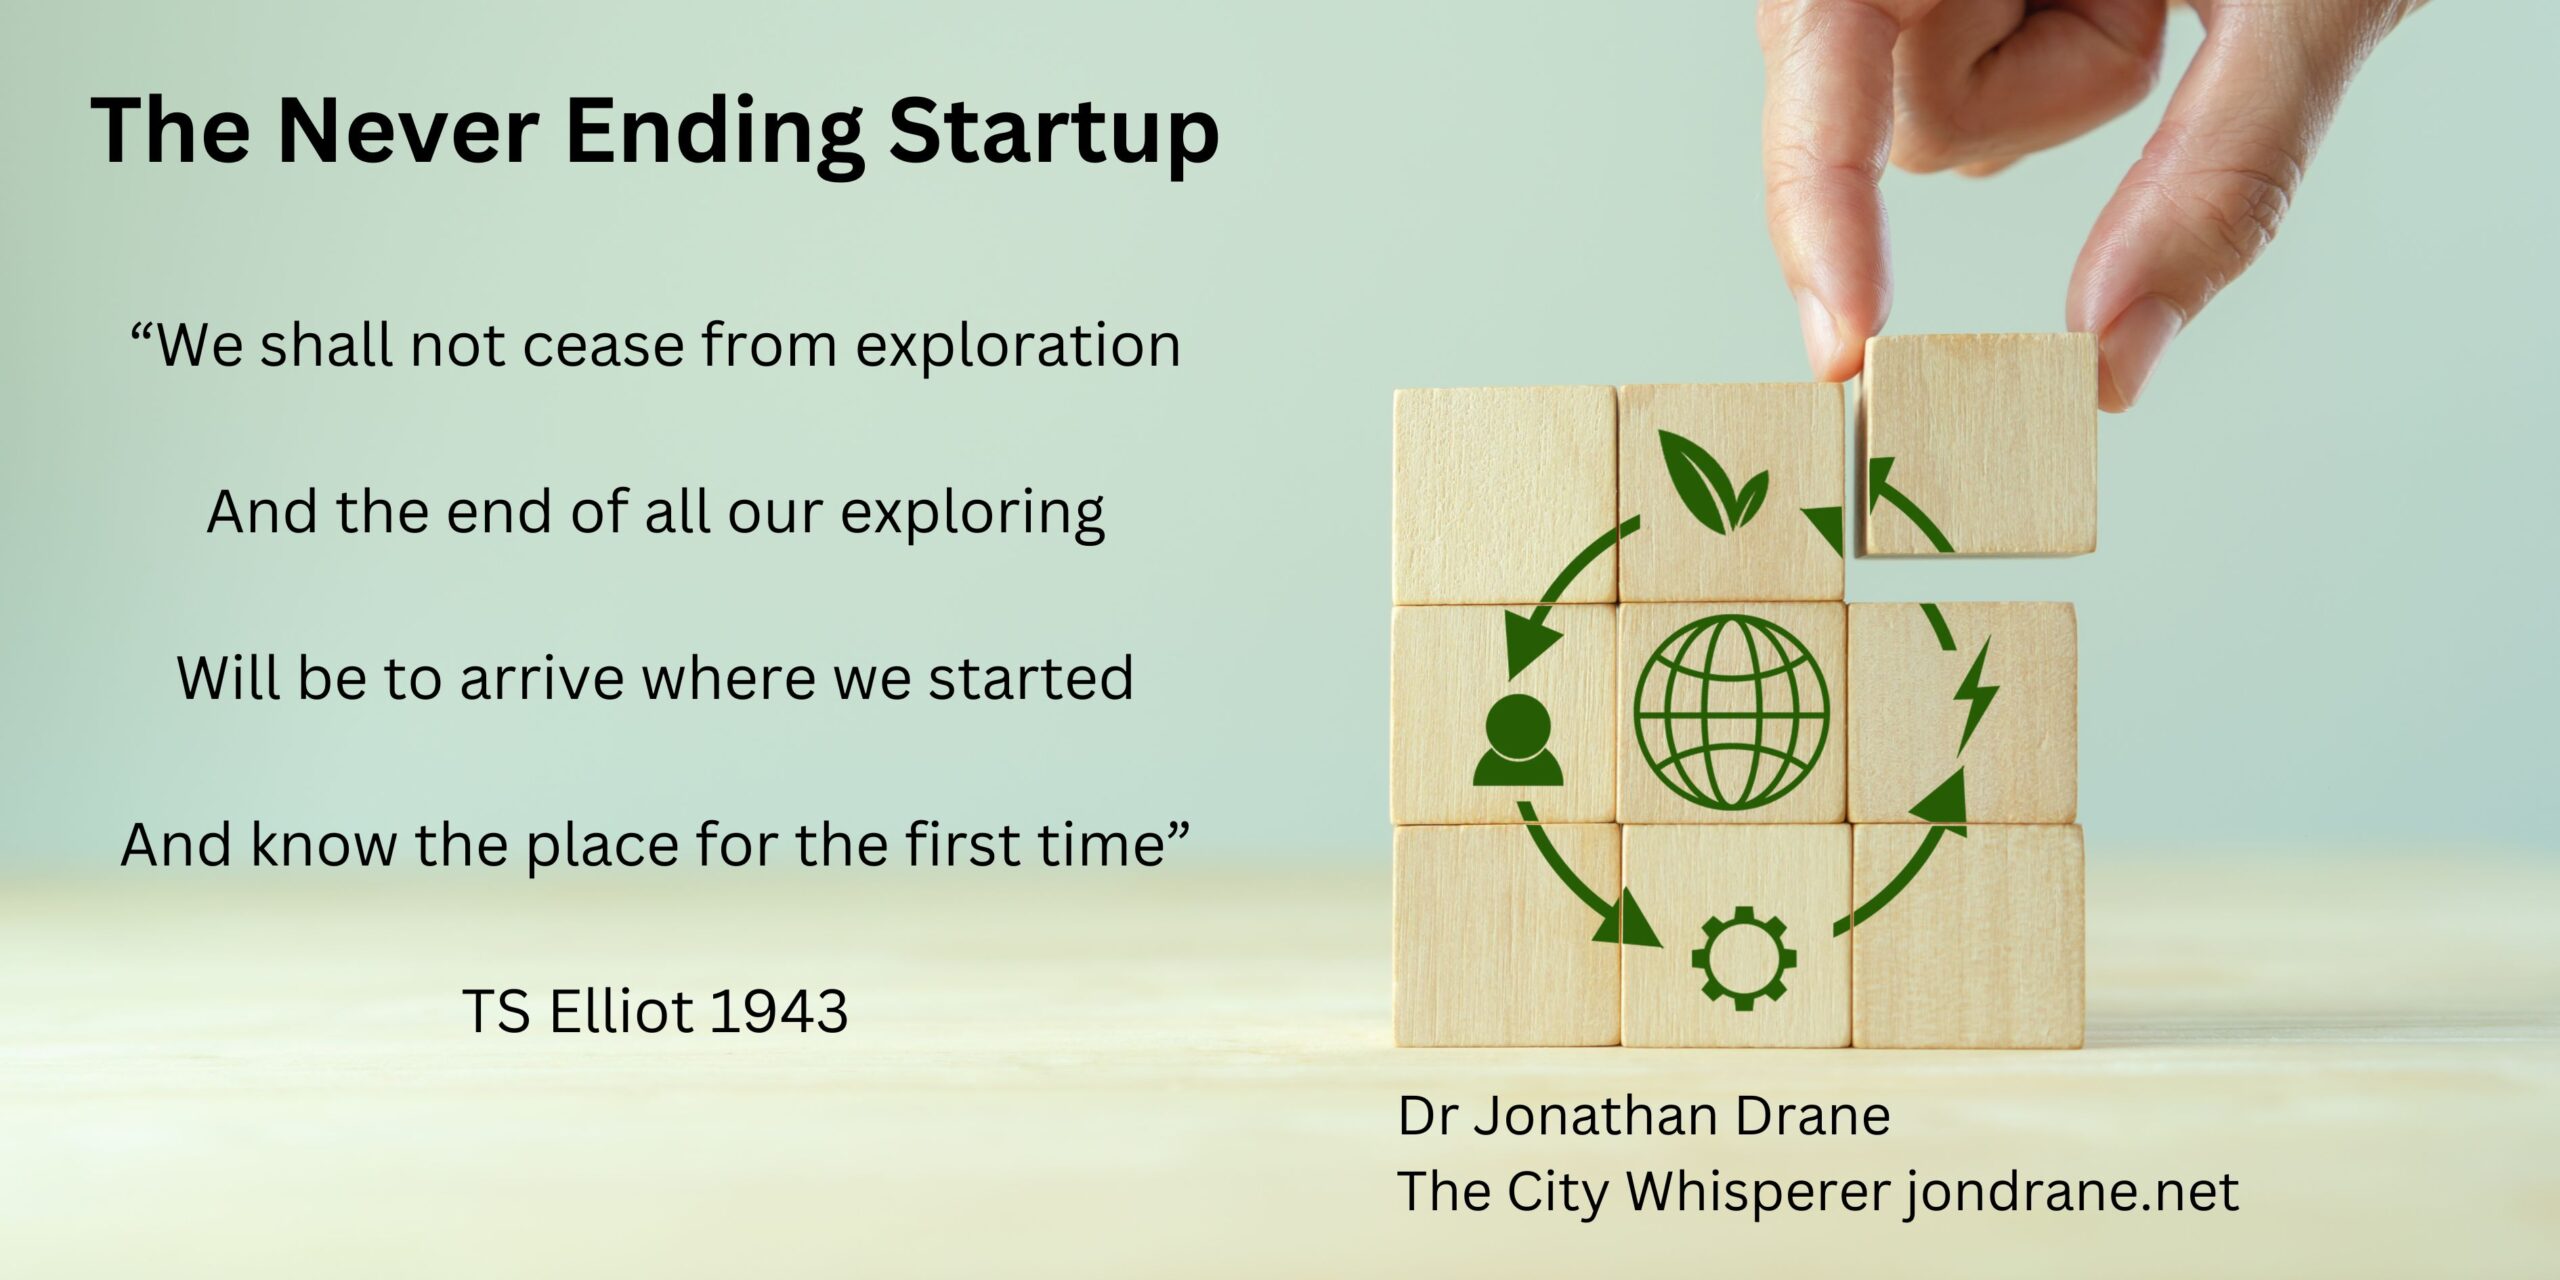 The Never Ending Startup Podcast by Dr Jon Drane The City Whisperer. on jondrane.net Startup journey and stories of longevity, “We shall not cease from exploration And the end of all our exploring Will be to arrive where we started And know the place for the first time” TS Elliot 1943